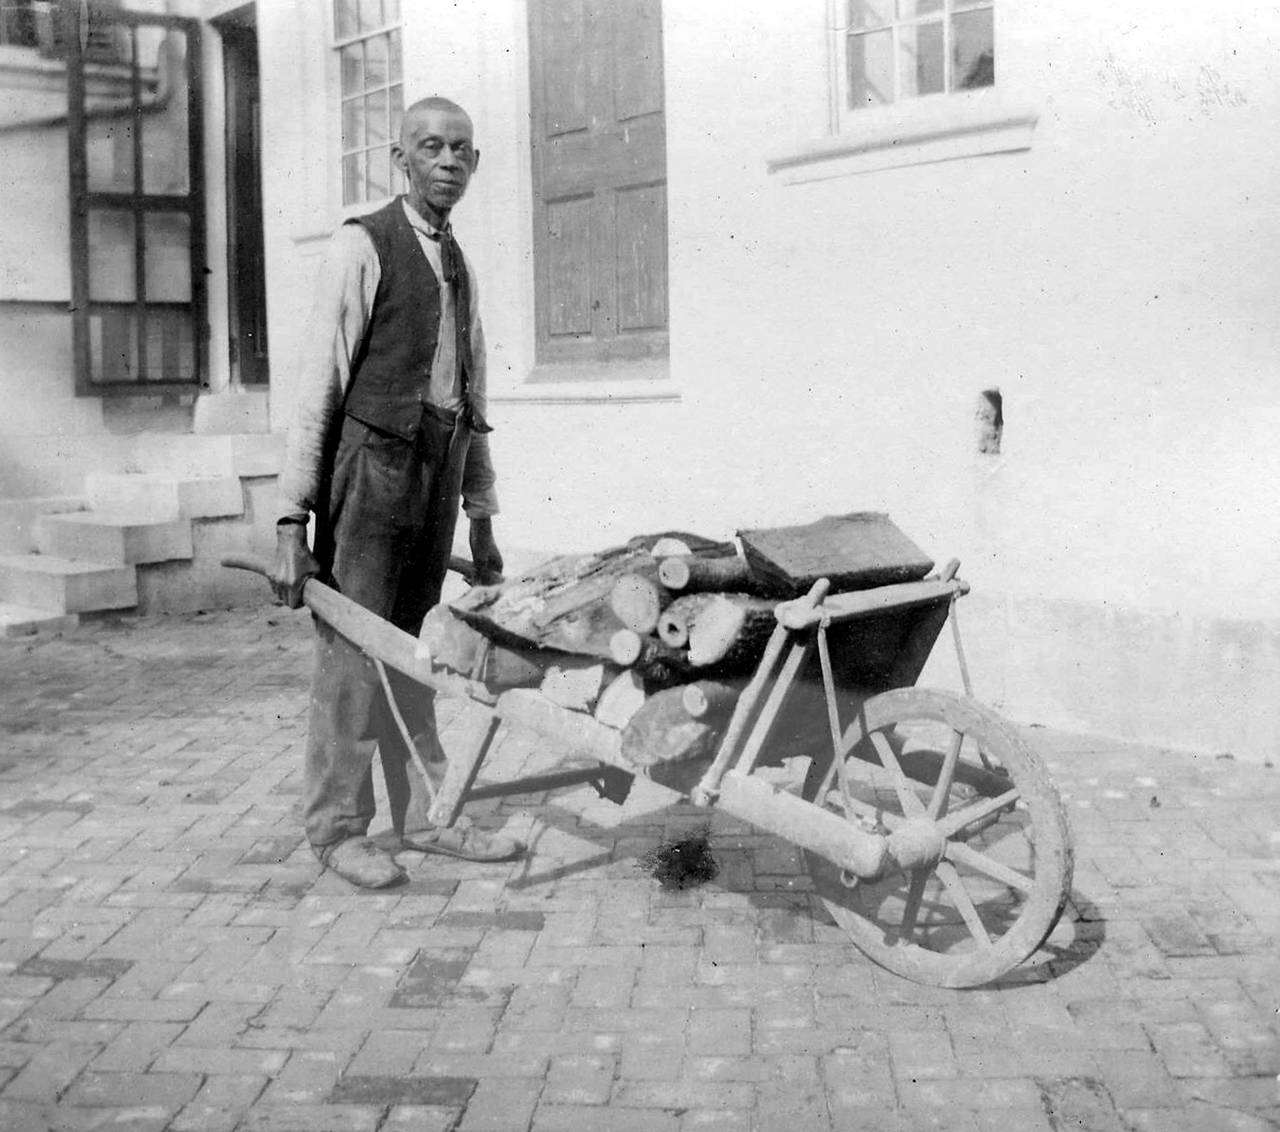 Jim Pratt, a formerly enslaved farm worker, with wheelbarrow in front of the south facade of the Hampton mansion, 1895.